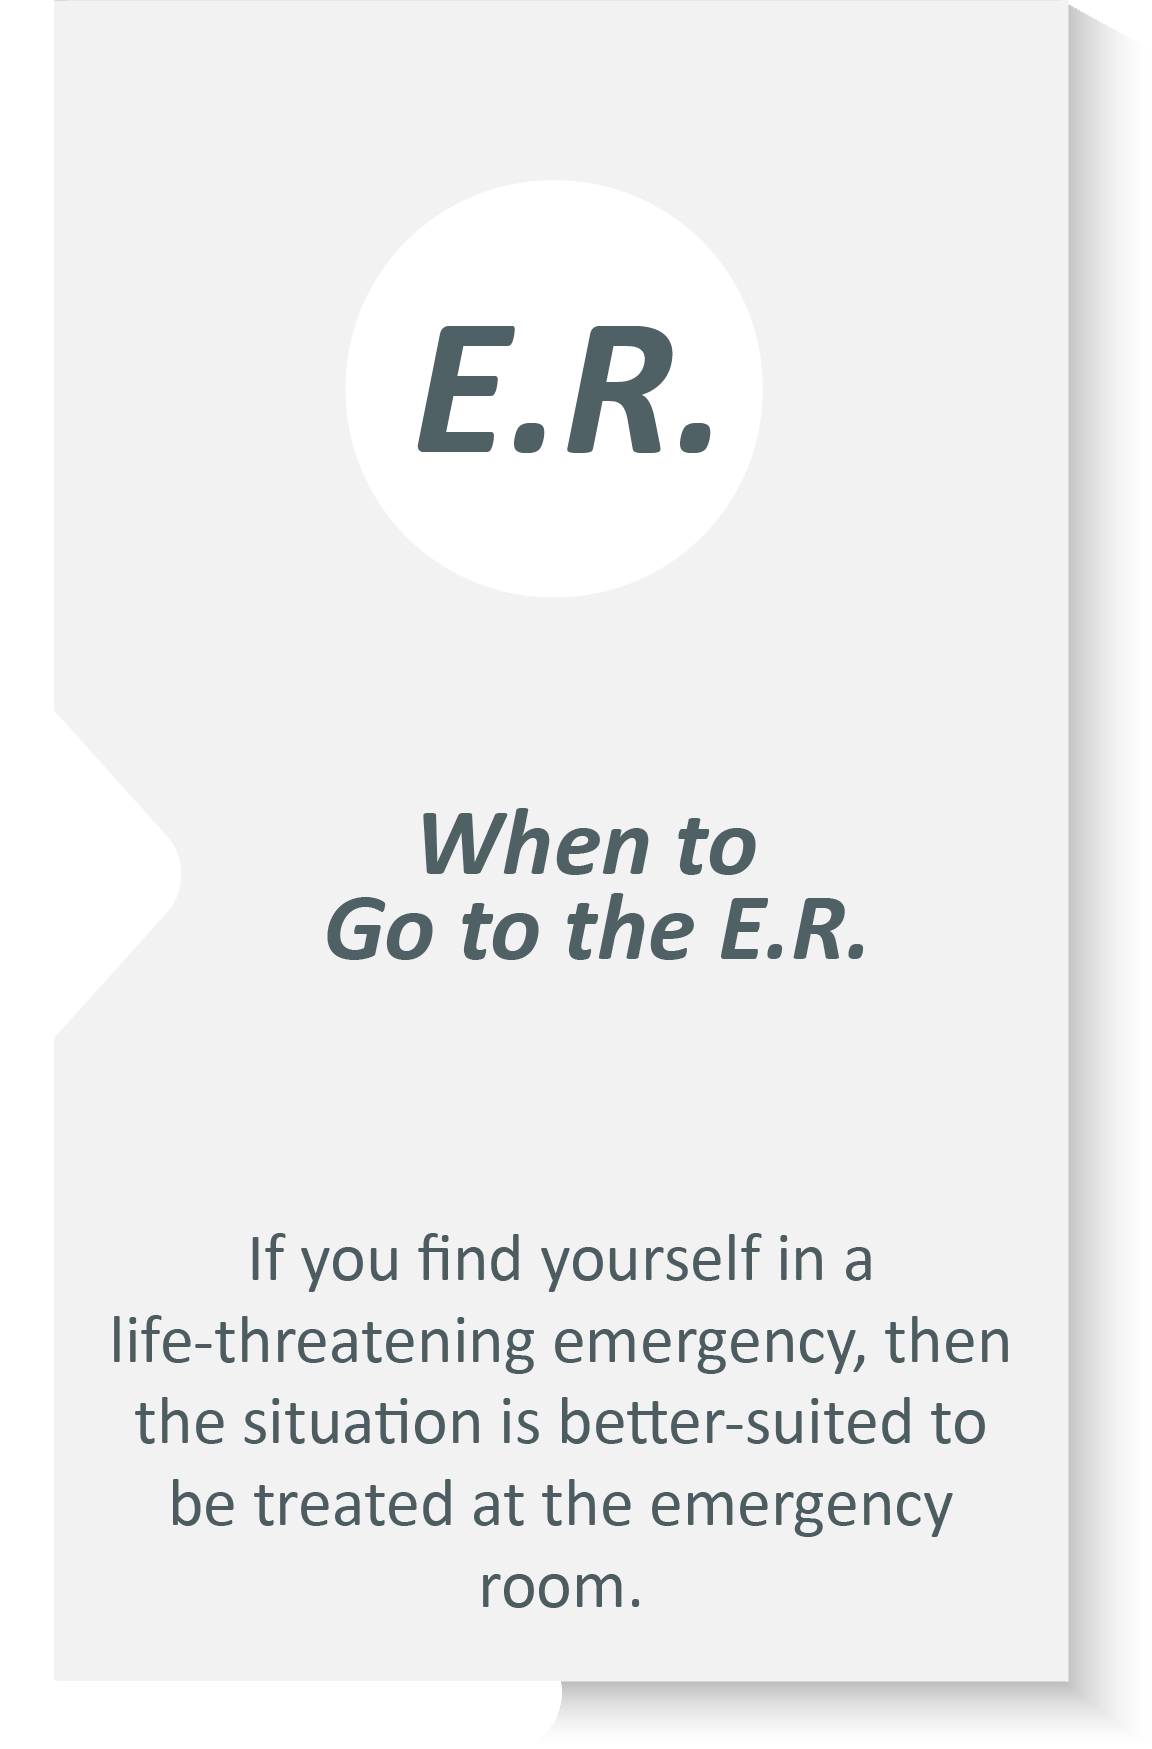 Emergency dentist infographic: If you find yourself in a life-threatening emergency, then the situation is better-suited to be treated at the emergency room.